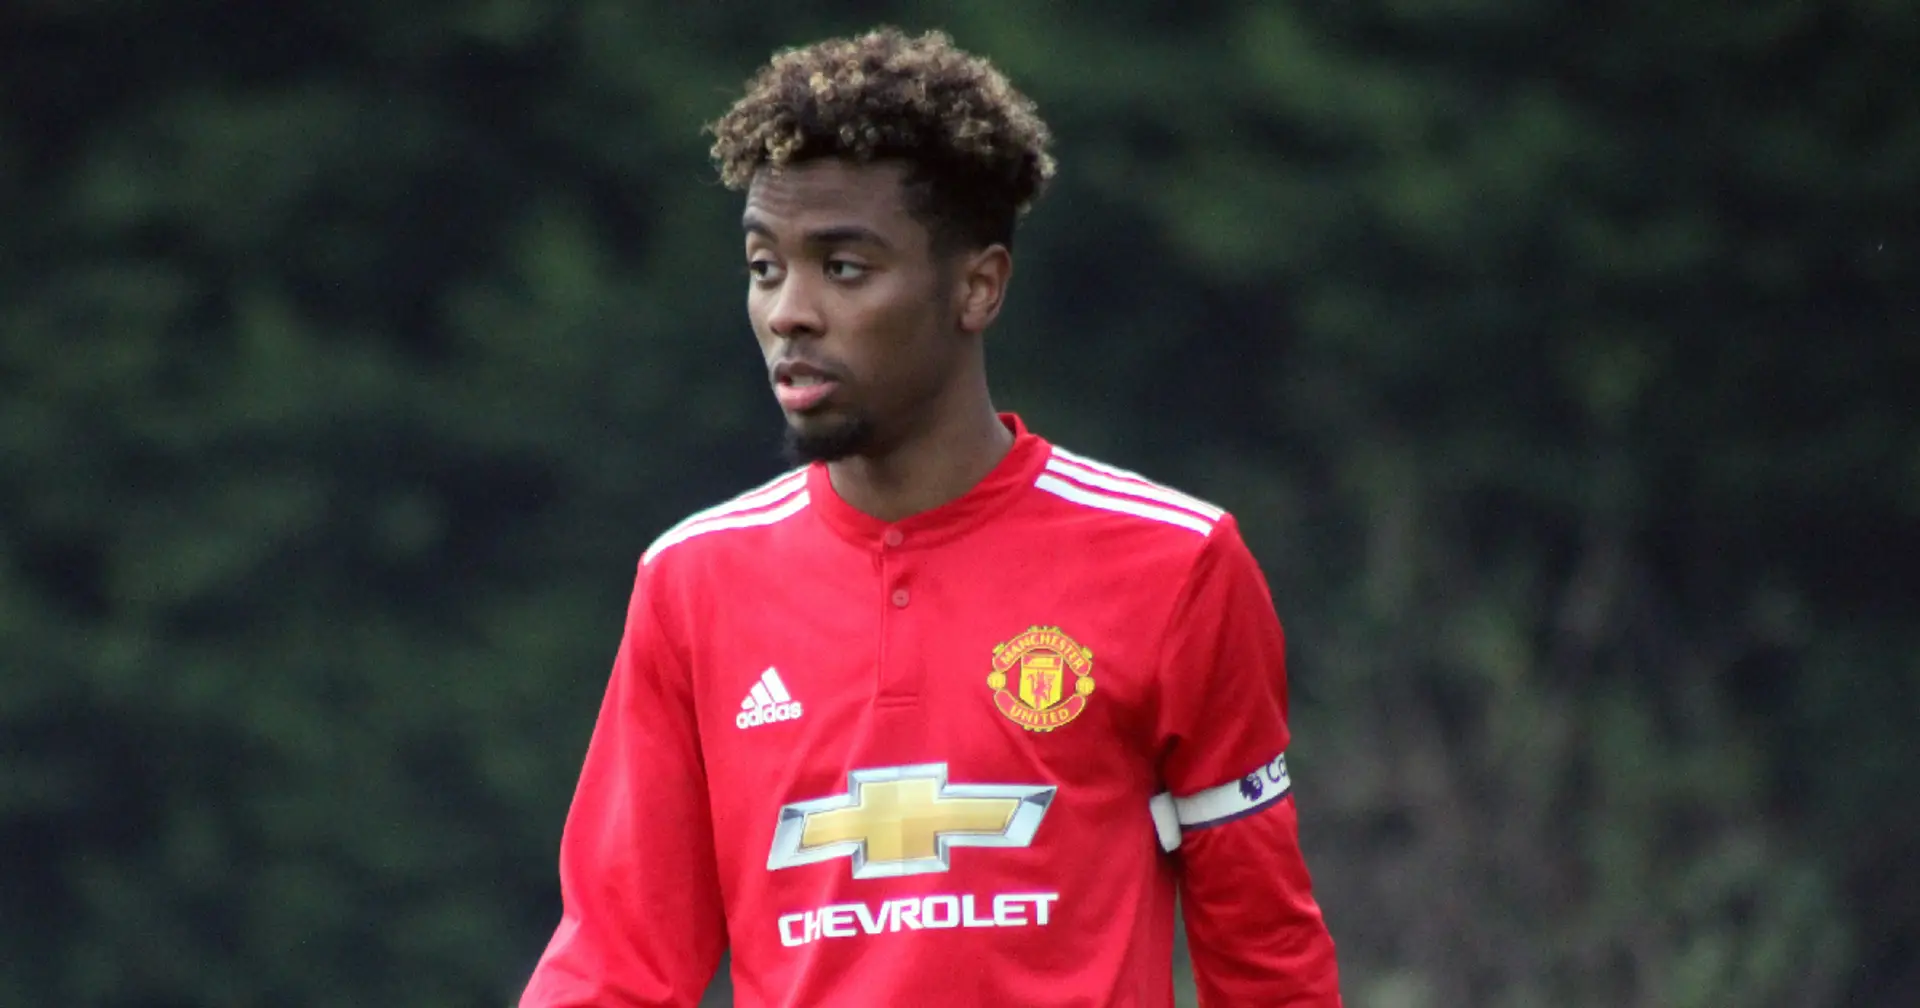 'We are all begging you to stay': United fans unhappy about Angel Gomes' exit